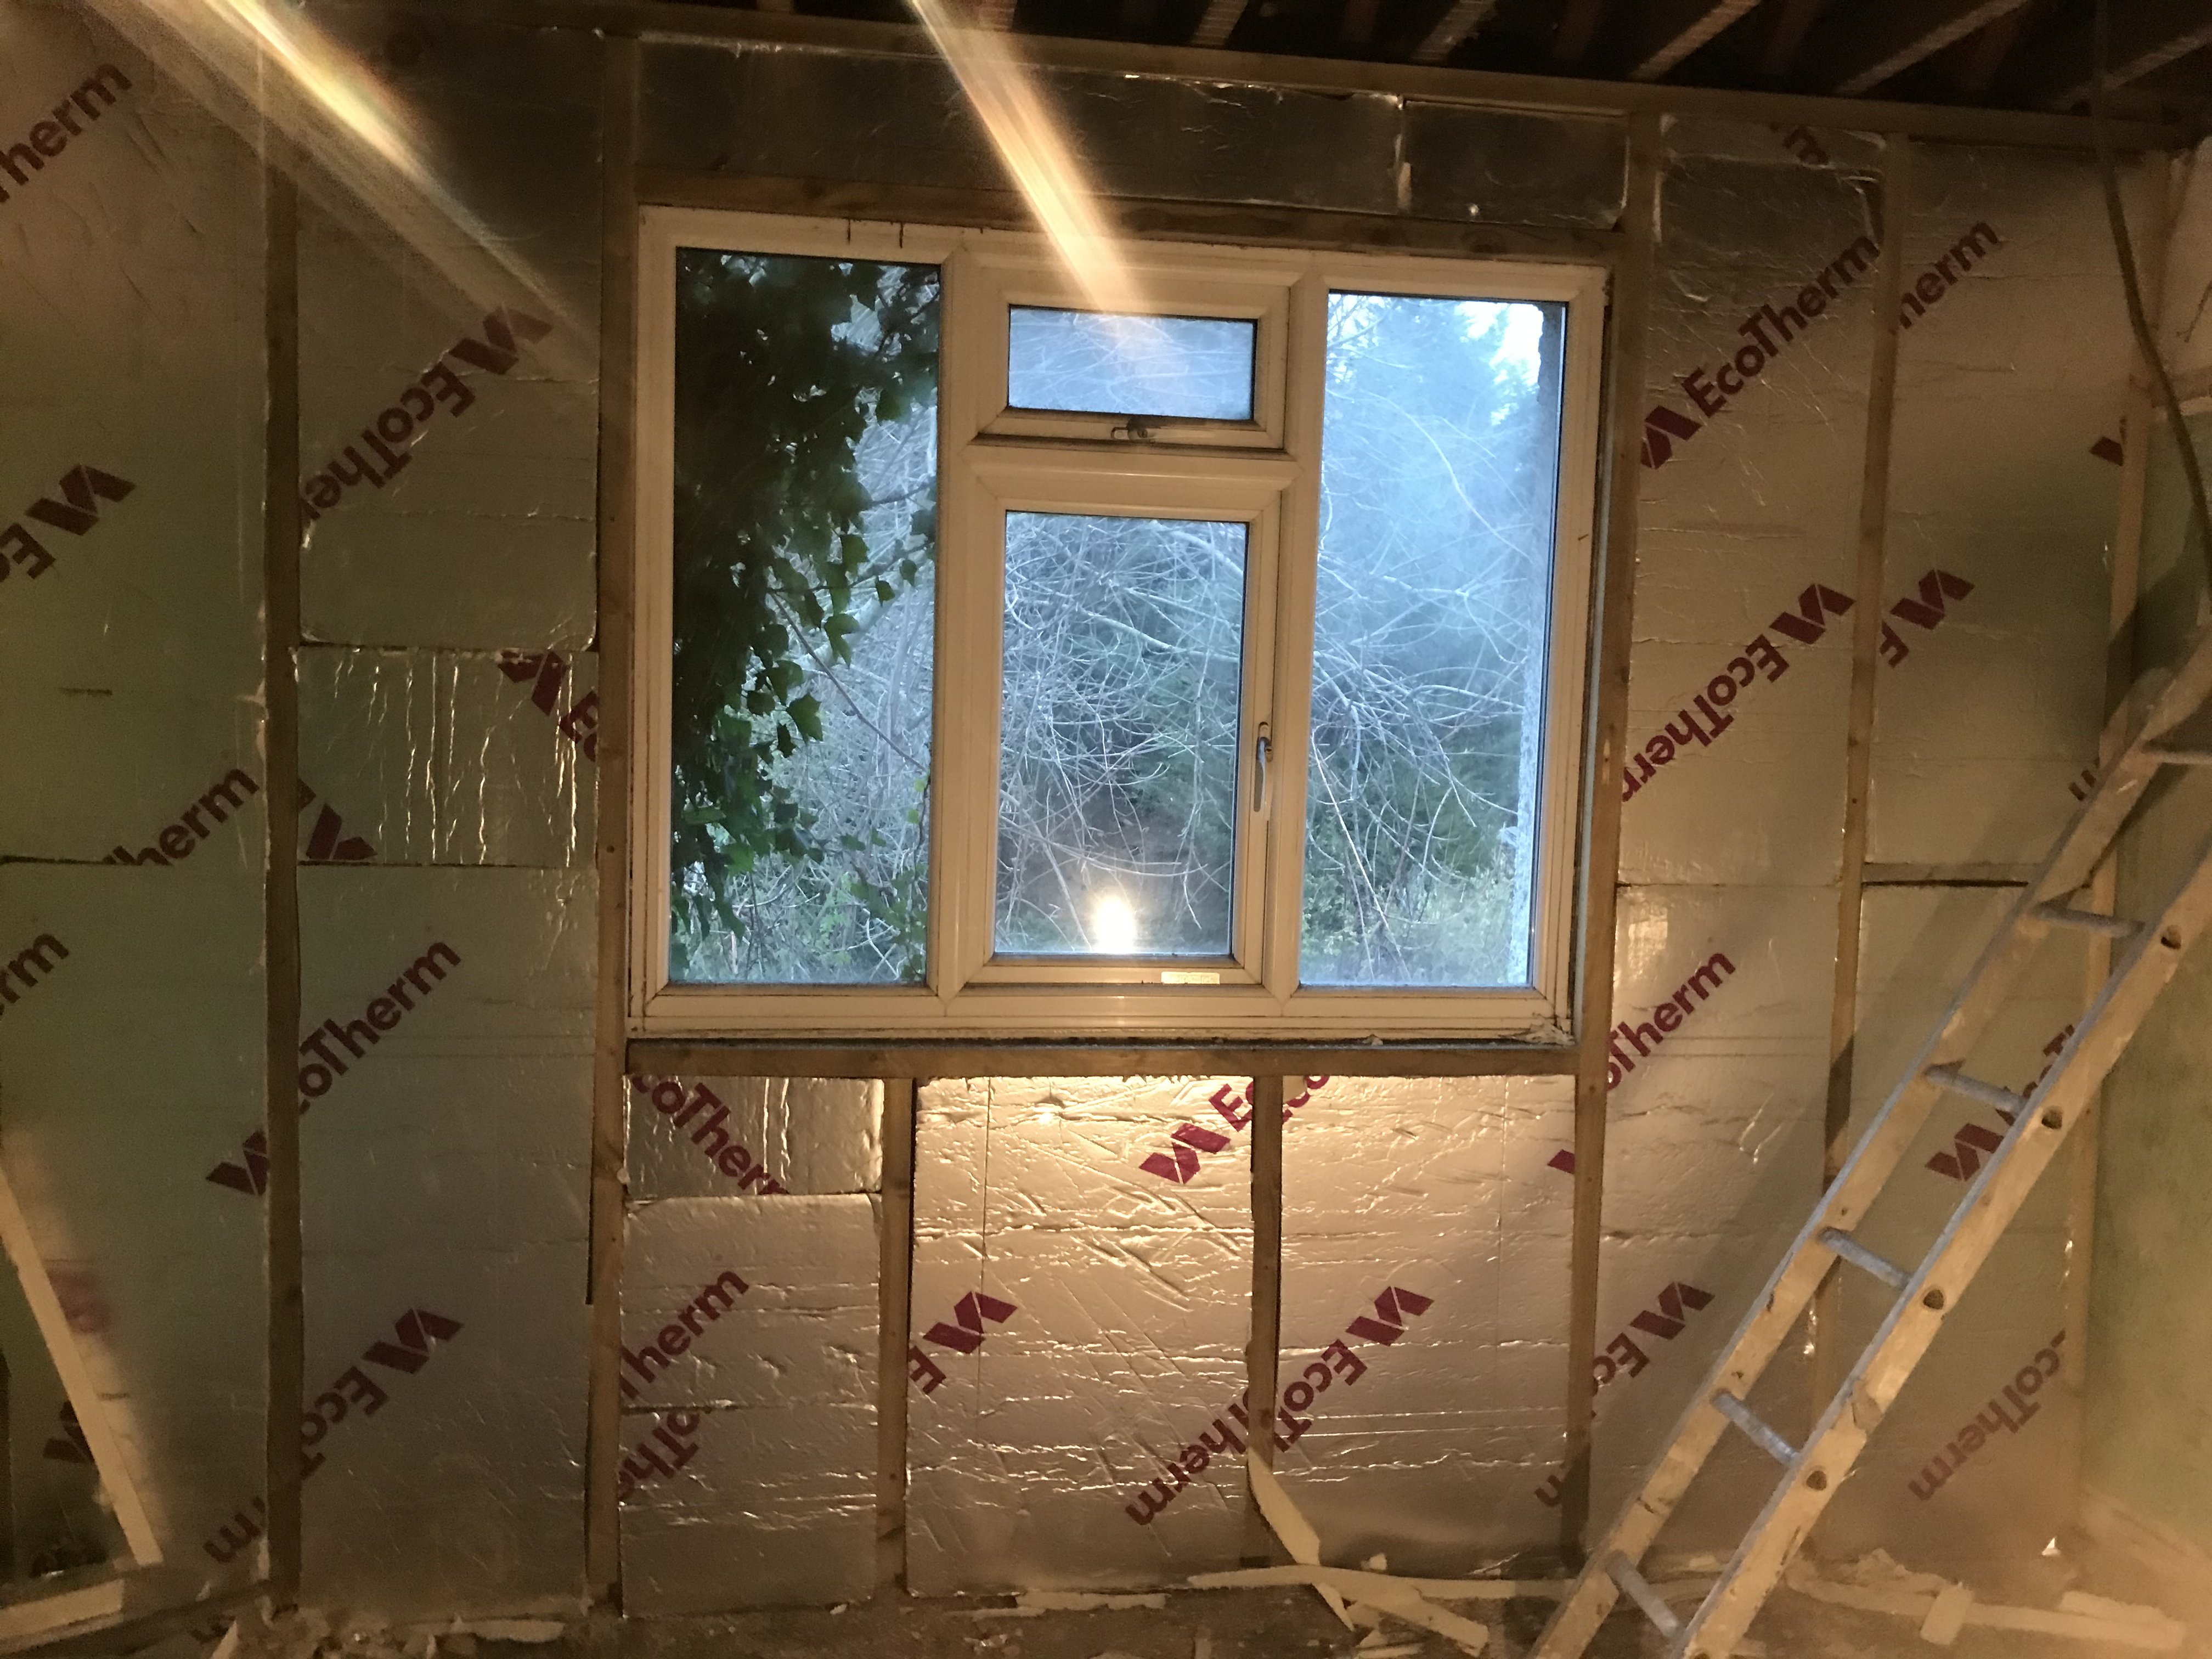 Insulation on internal walls , would you do bathroom the same ?